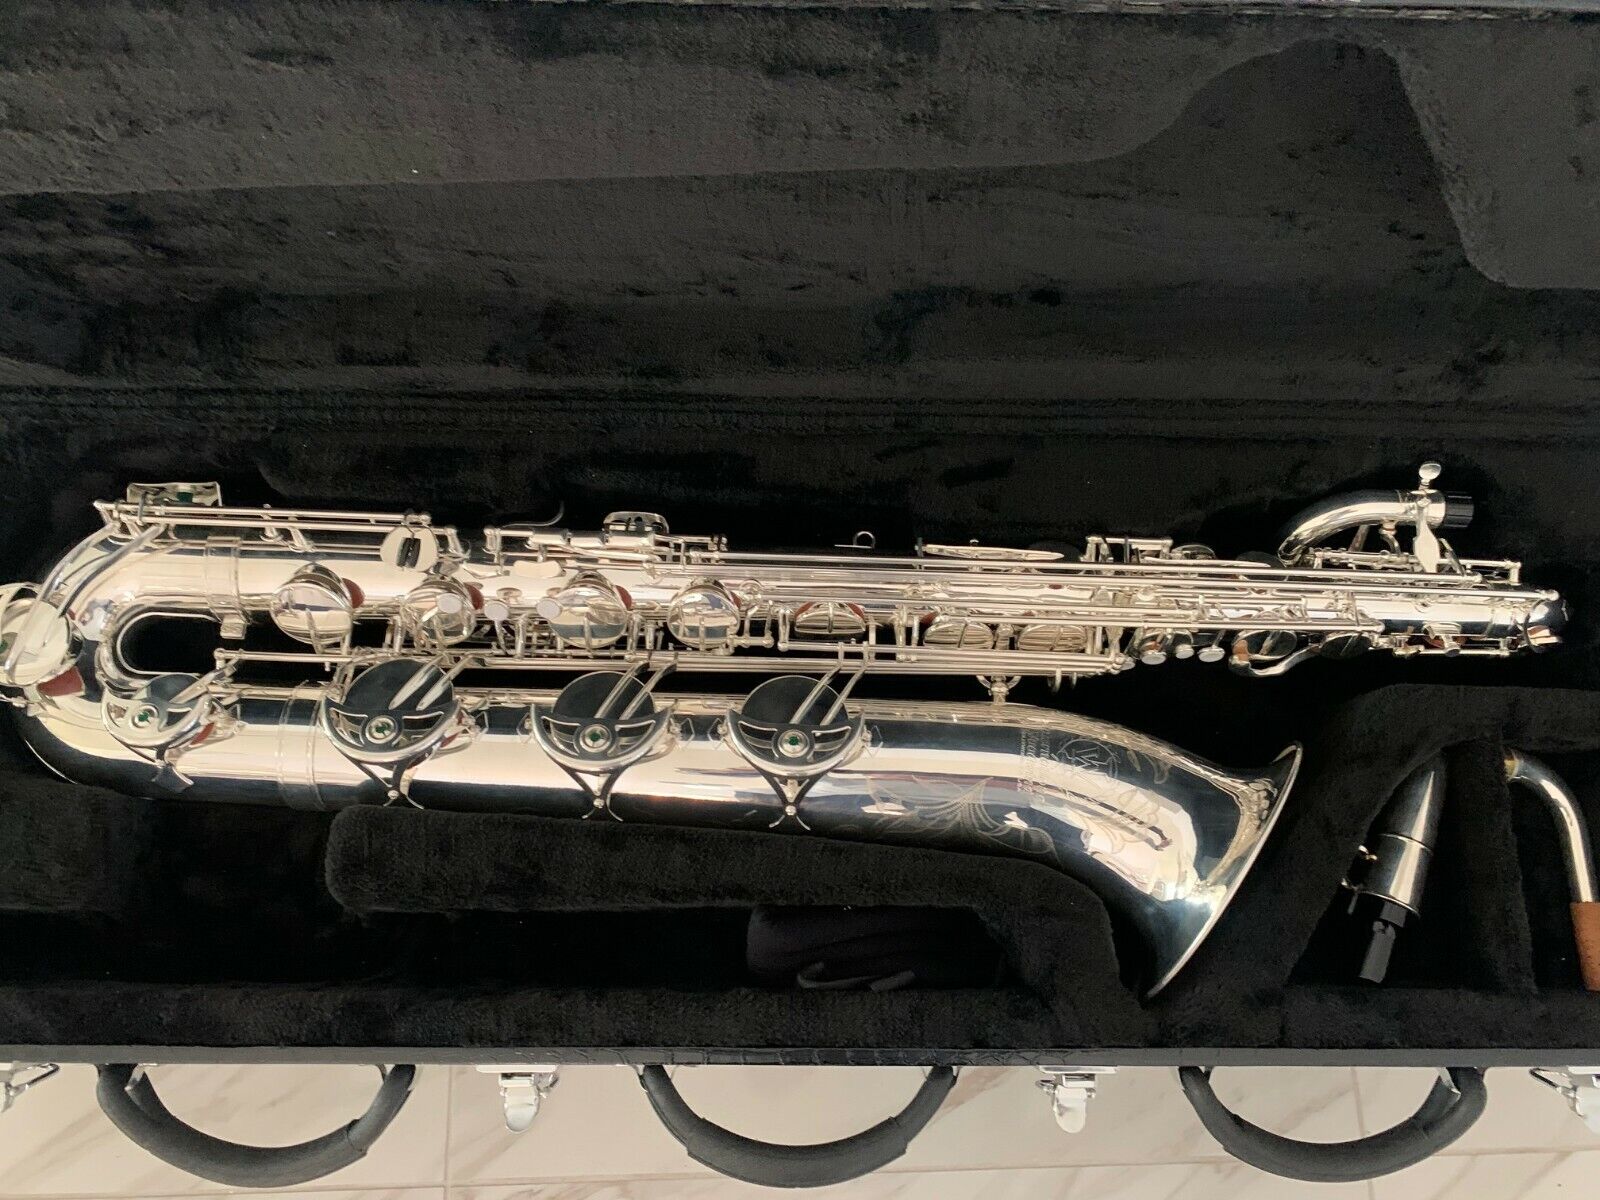 Iw 661 Bsp- Baritone Saxophone, Silverplated  - Low A,  Custom Engraved In Usa